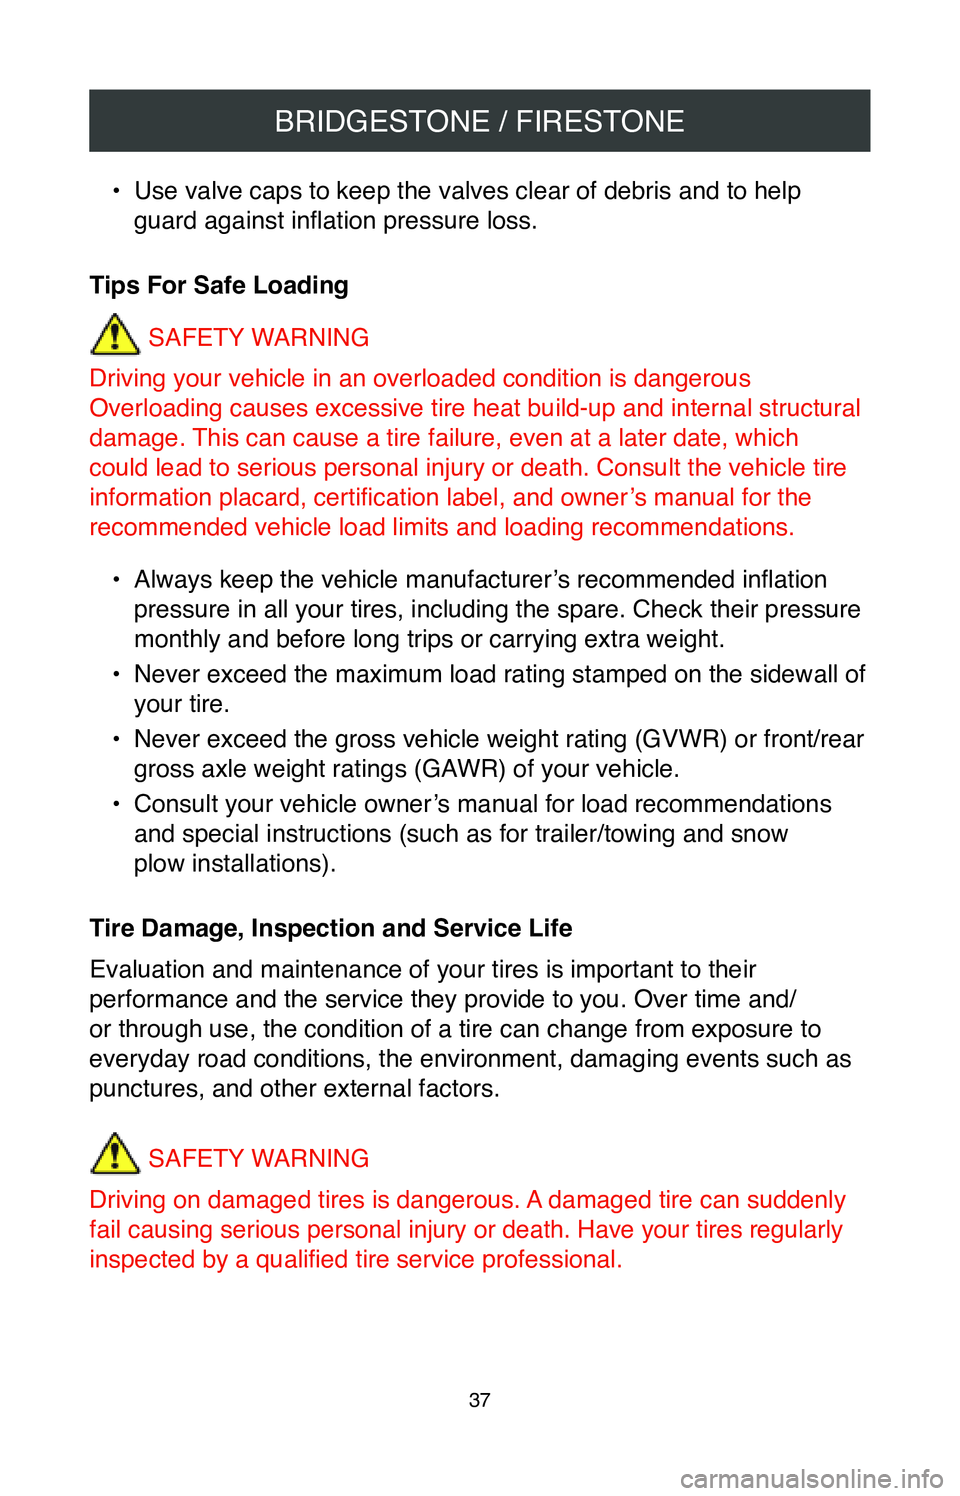 TOYOTA AVALON HYBRID 2020  Warranties & Maintenance Guides (in English) BRIDGESTONE / FIRESTONE
37
• Use valve caps to keep the valves clear of debris and to help 
guard against inflation pressure loss.
Tips For Safe Loading SAFETY WARNING
Driving your vehicle in an ove